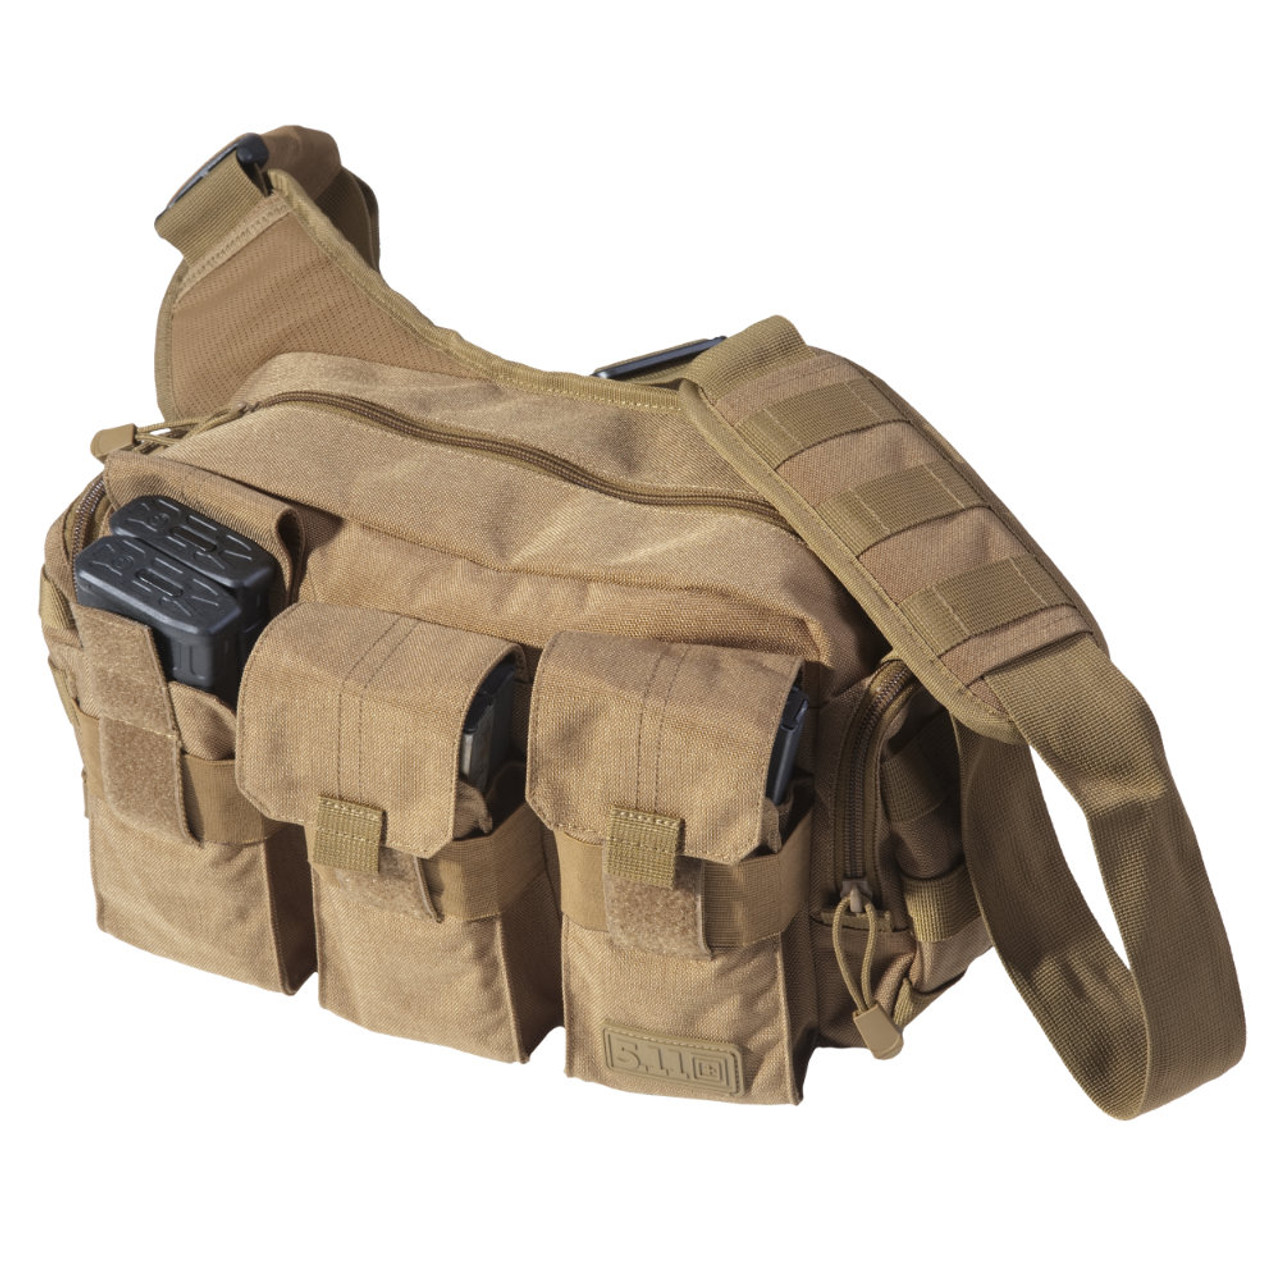 5.11 Tactical - A Go-Bag is an emergency bag equipped with gear tailored  to respond to various threats and environments. How do you go about  building one? There's no absolute way, but